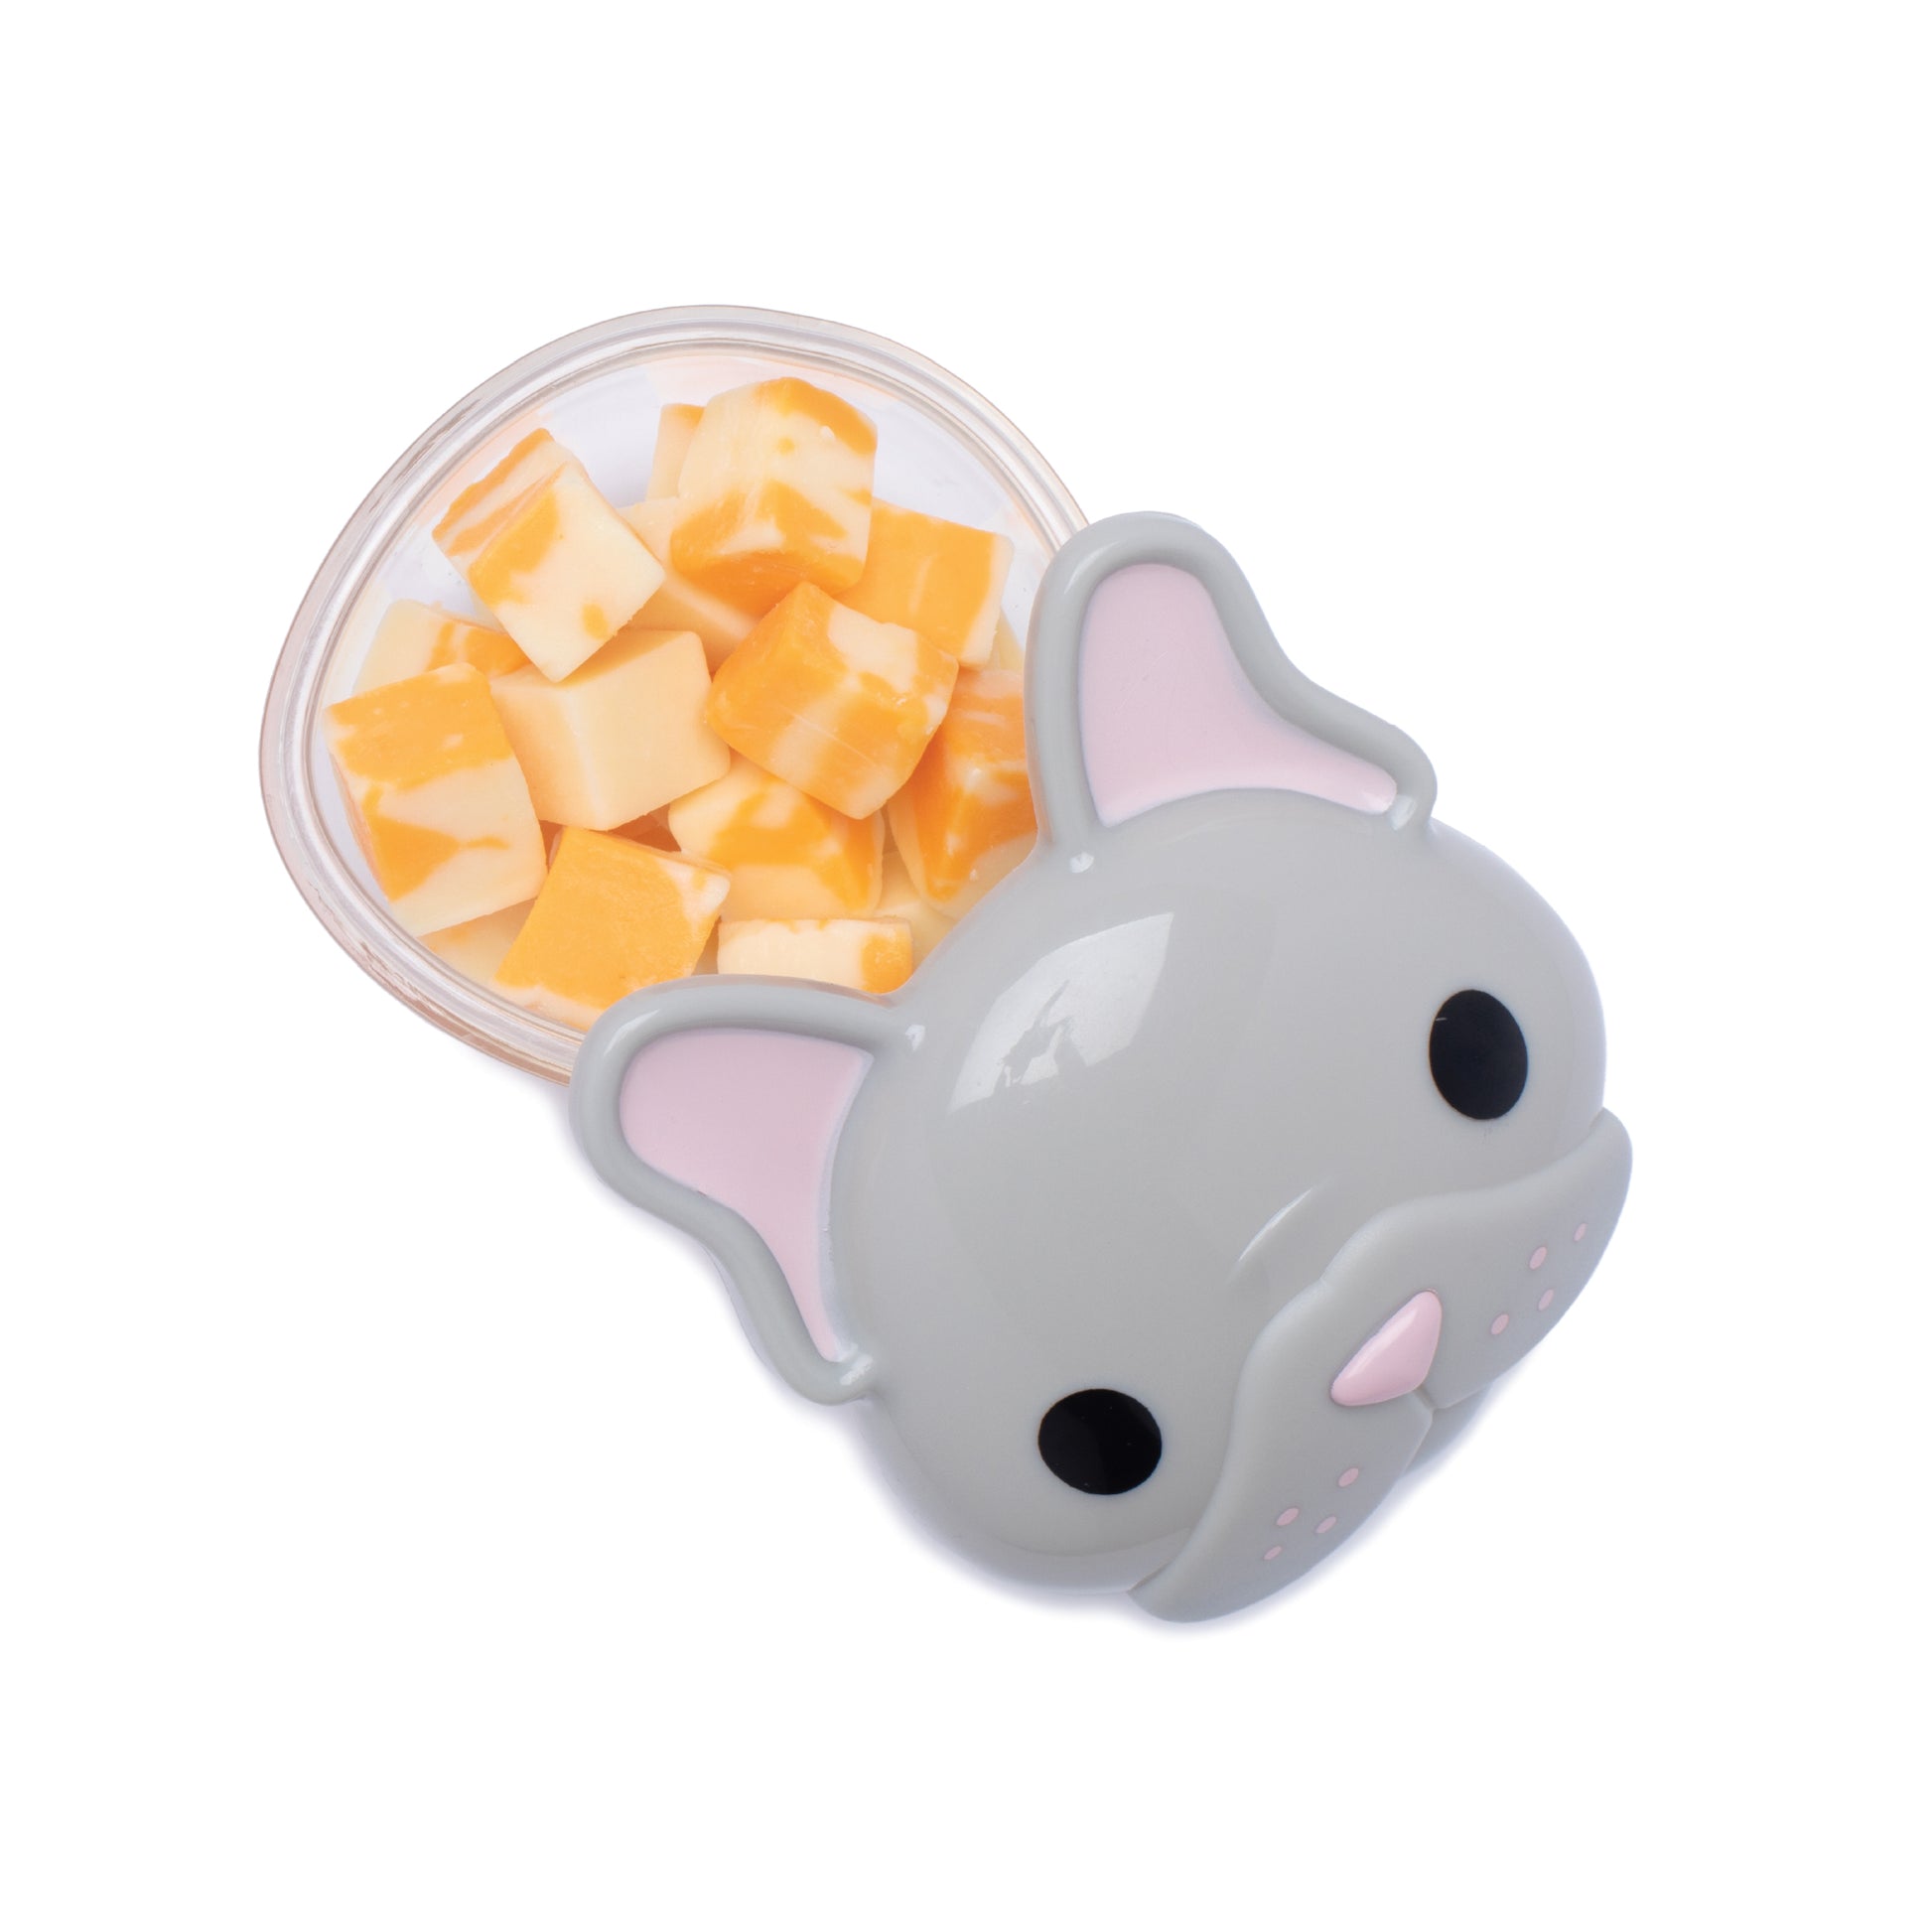 Melii Bulldog Snack Containers with Lids - Safe and Playful Food Storage for Toddlers and Kids